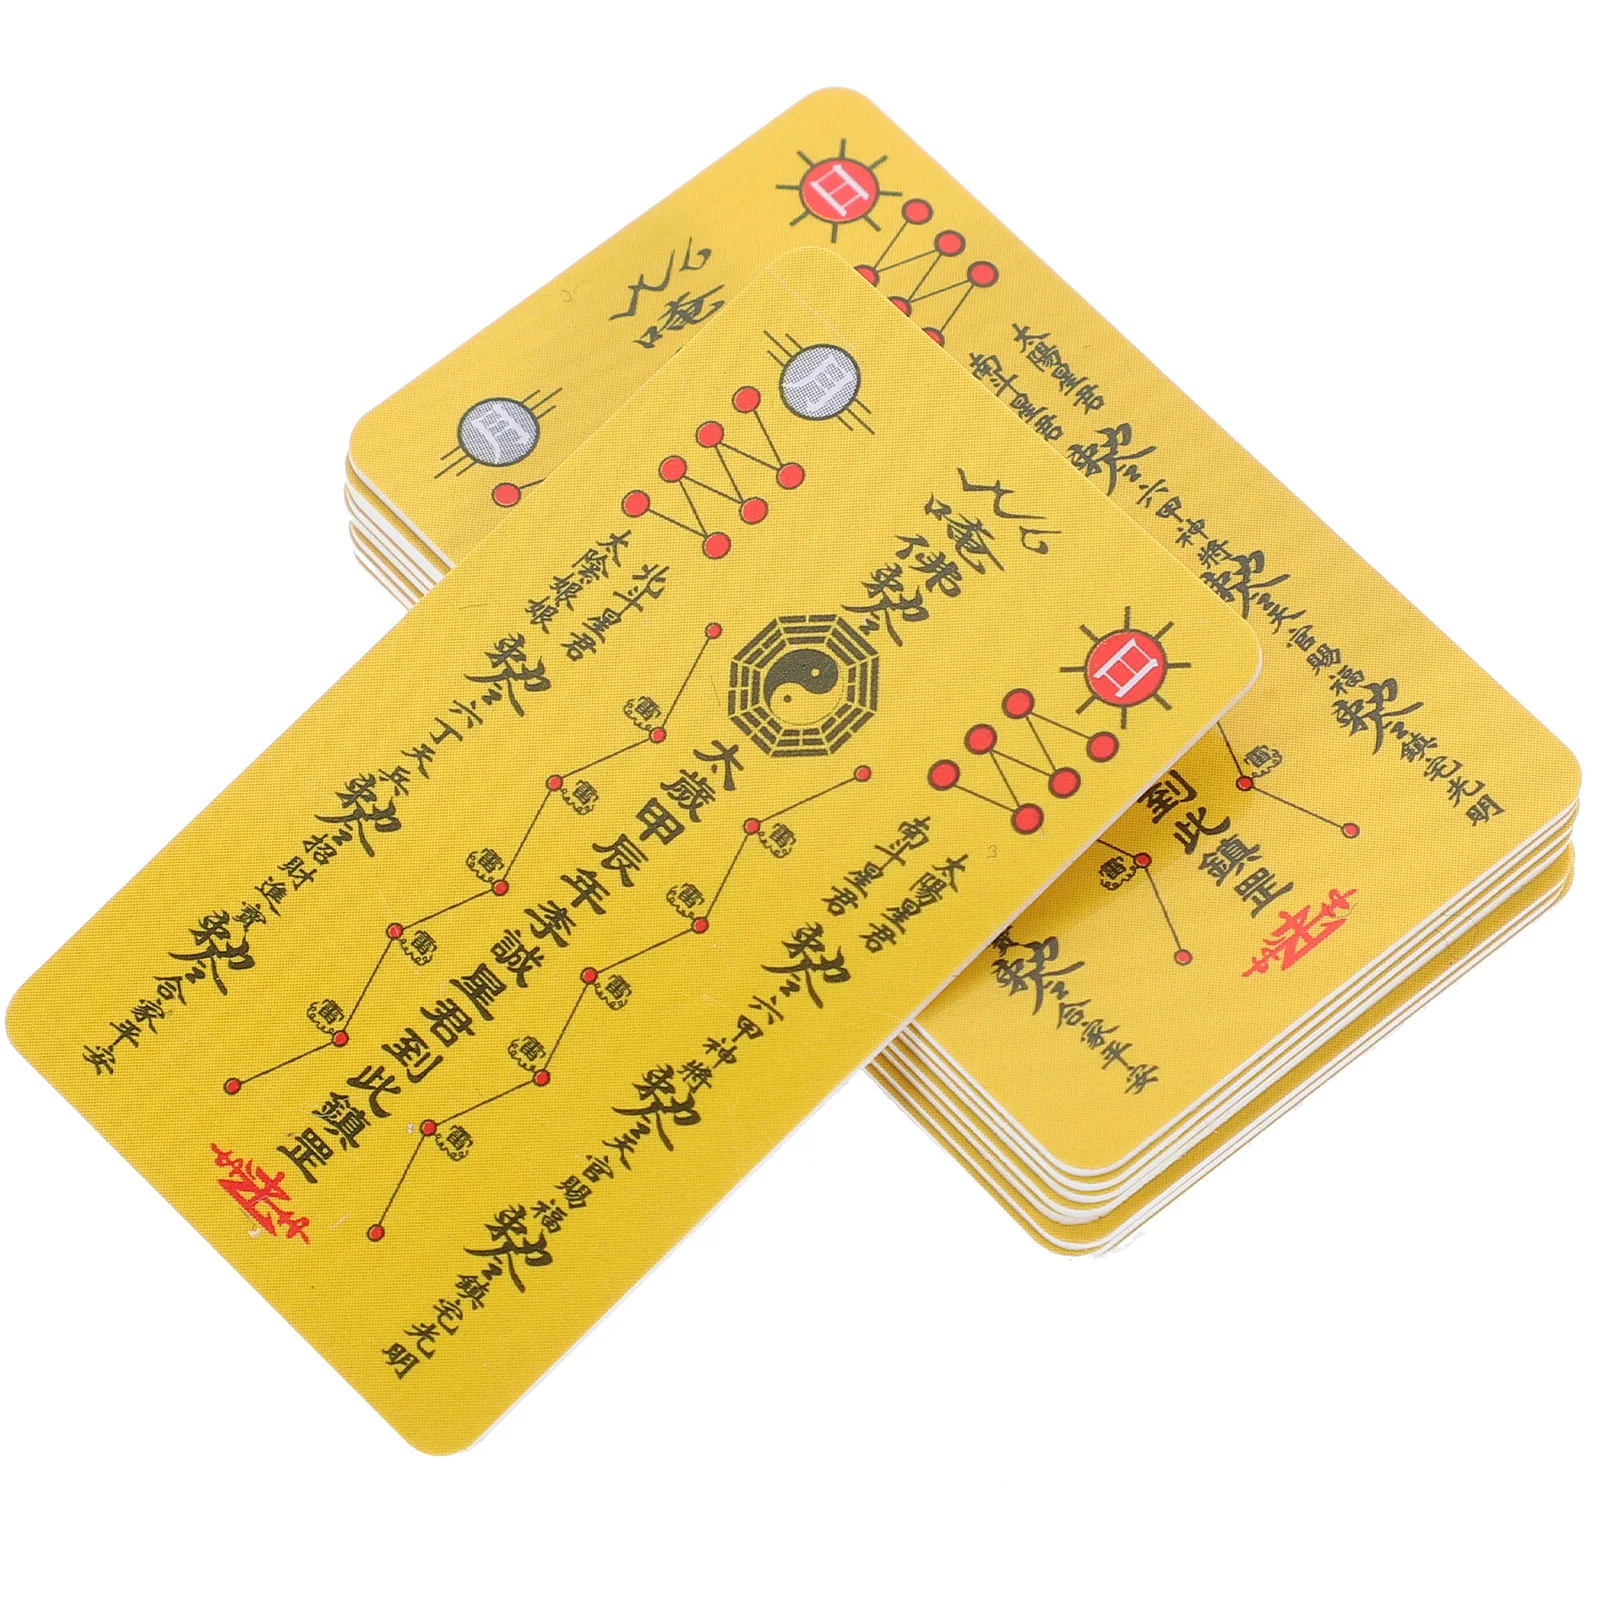 

10pcs Chinese Amulet Taisui Card Taisui Card Chinese Lunar Year Luck Auspicious Protection Cards